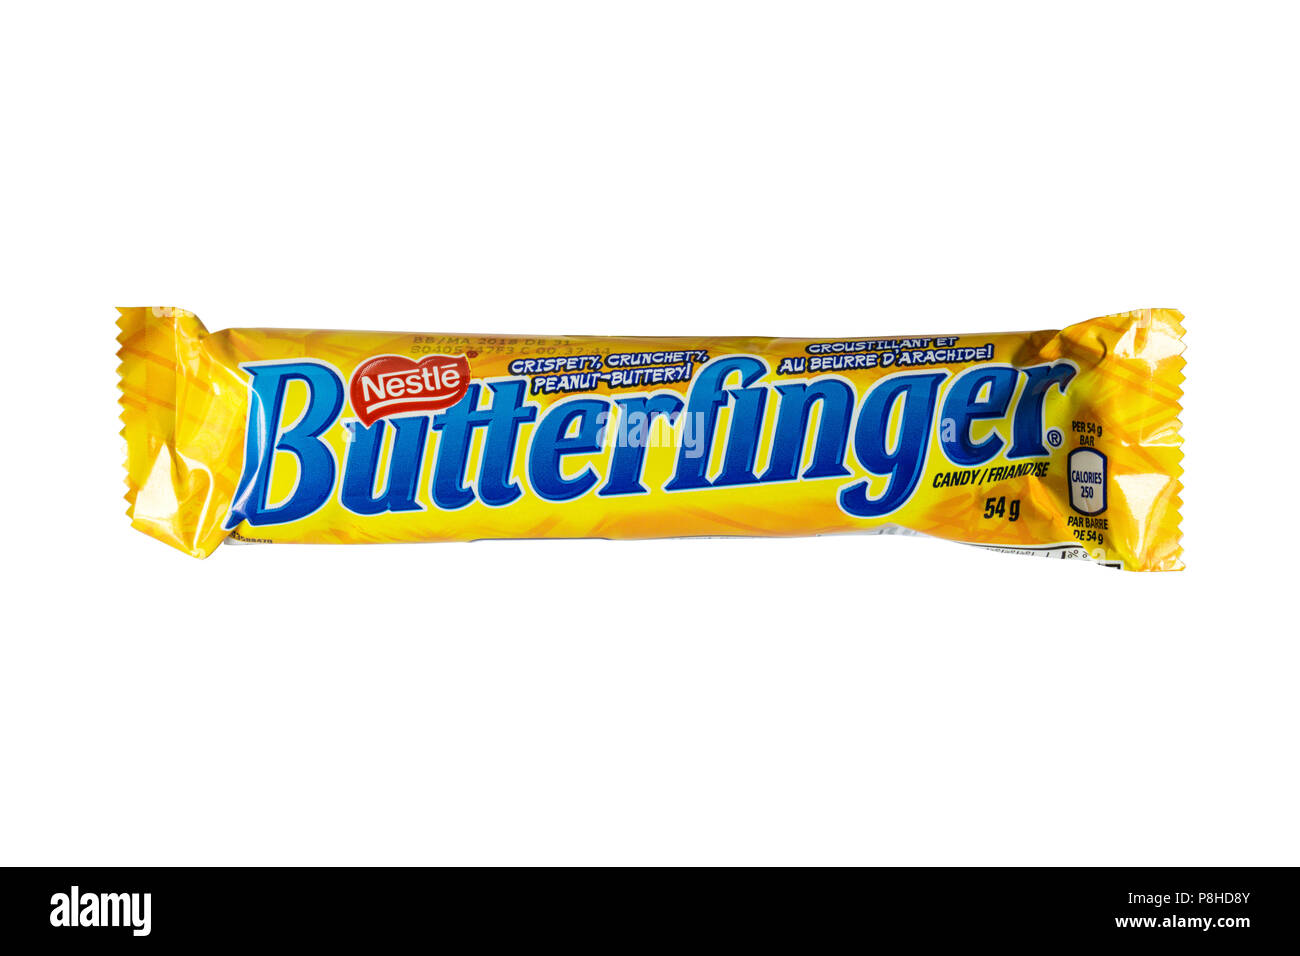 Butterfinger peanut butter and chocolate bar, made by Nestle. Stock Photo